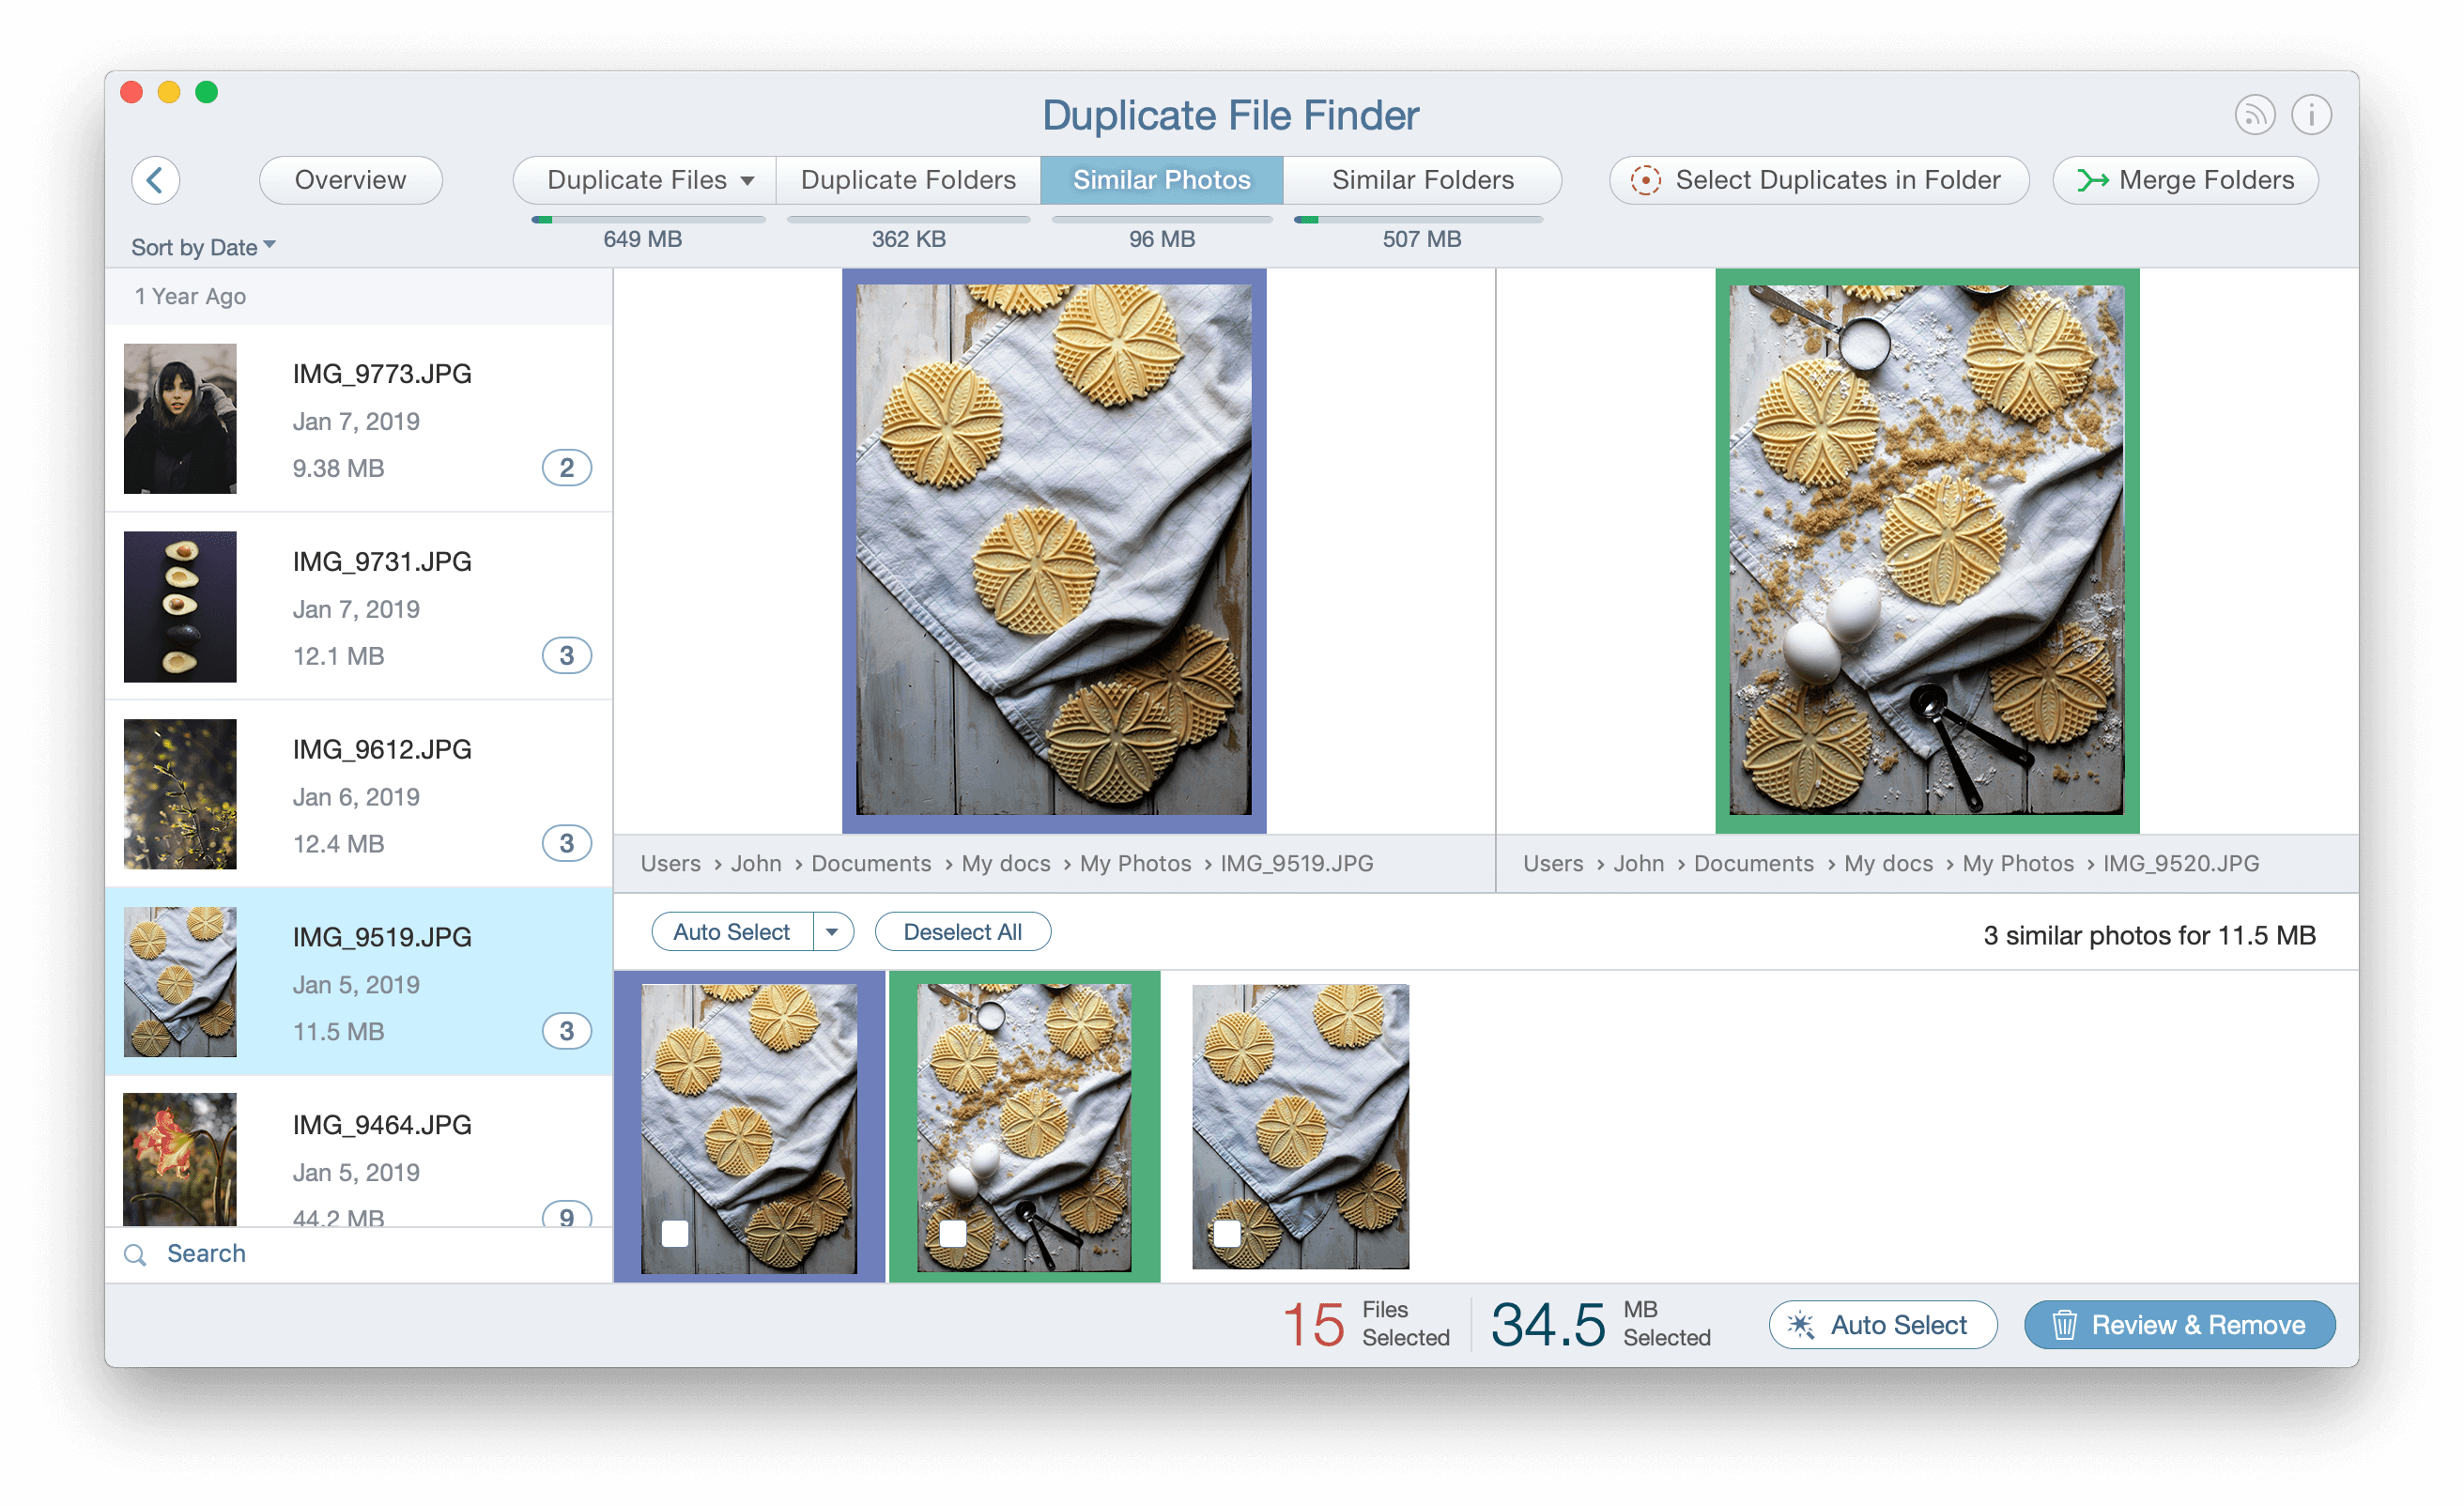 Similar Photos section in Duplicate File Finder